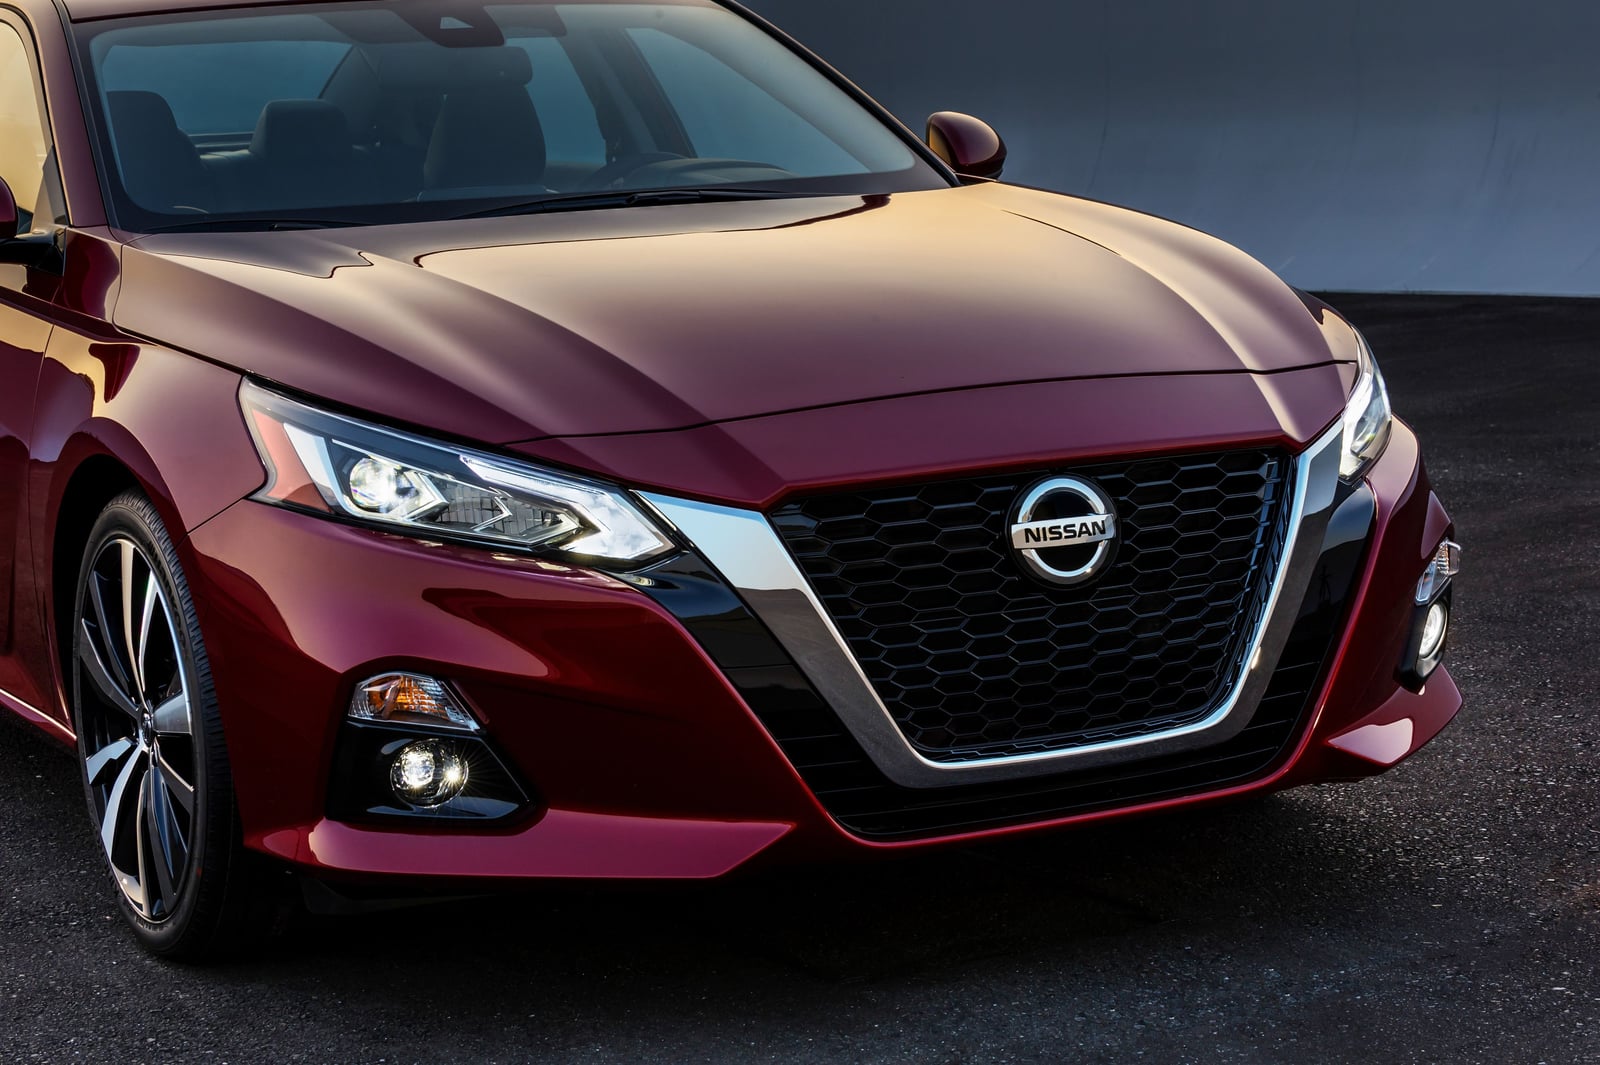 2019-nissan-altima-deals-prices-incentives-leases-overview